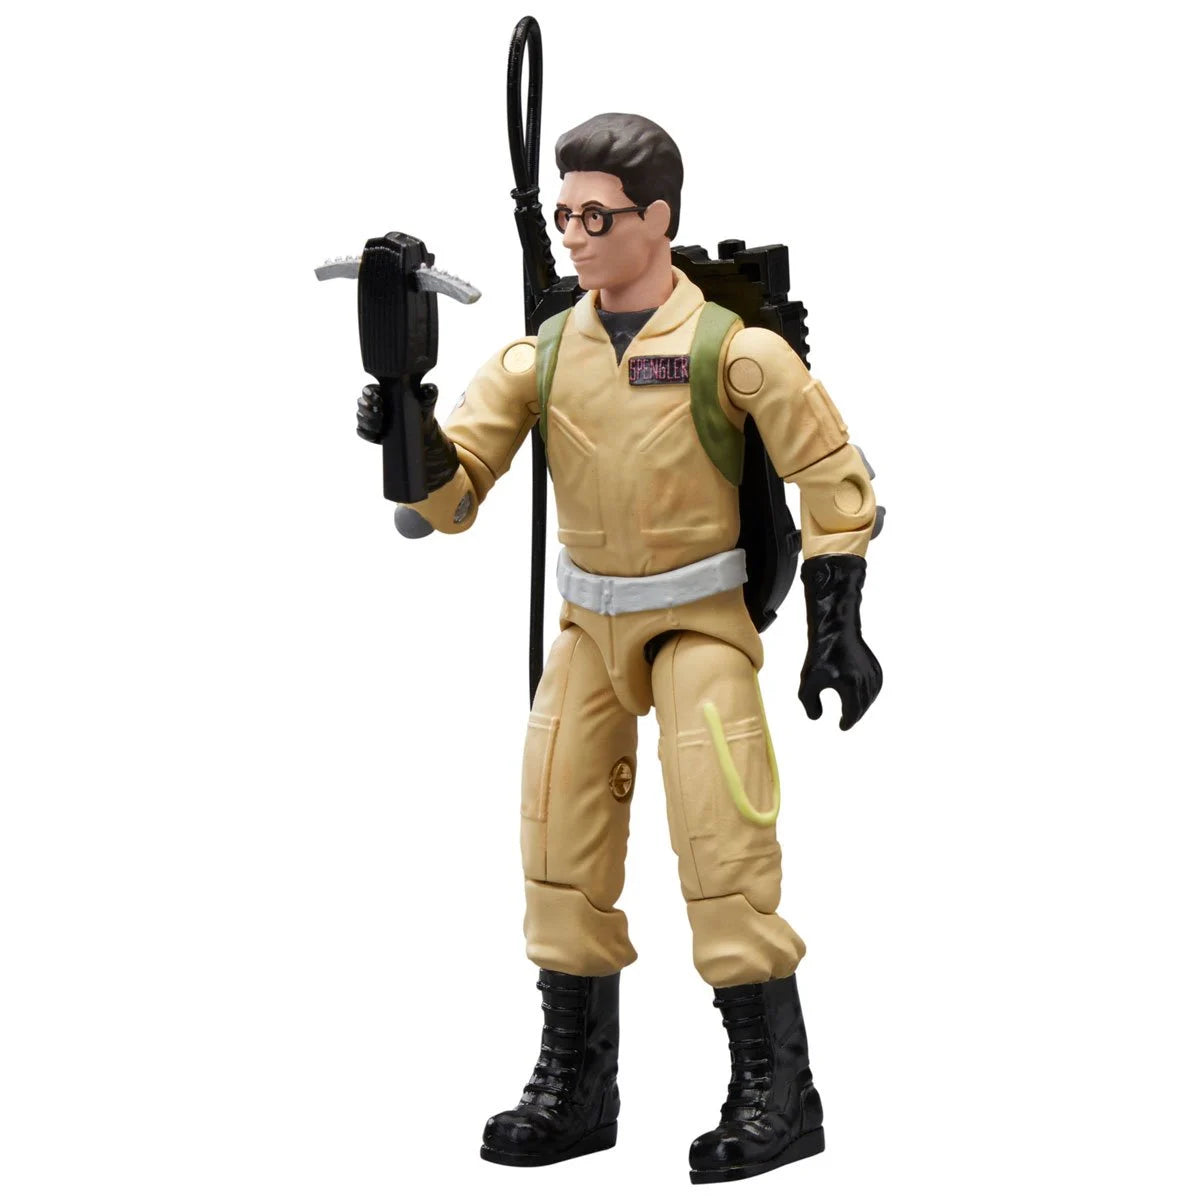 Ghostbusters (1984) Plasma Pack O-Ring 3.75" Action Figure Four Pack